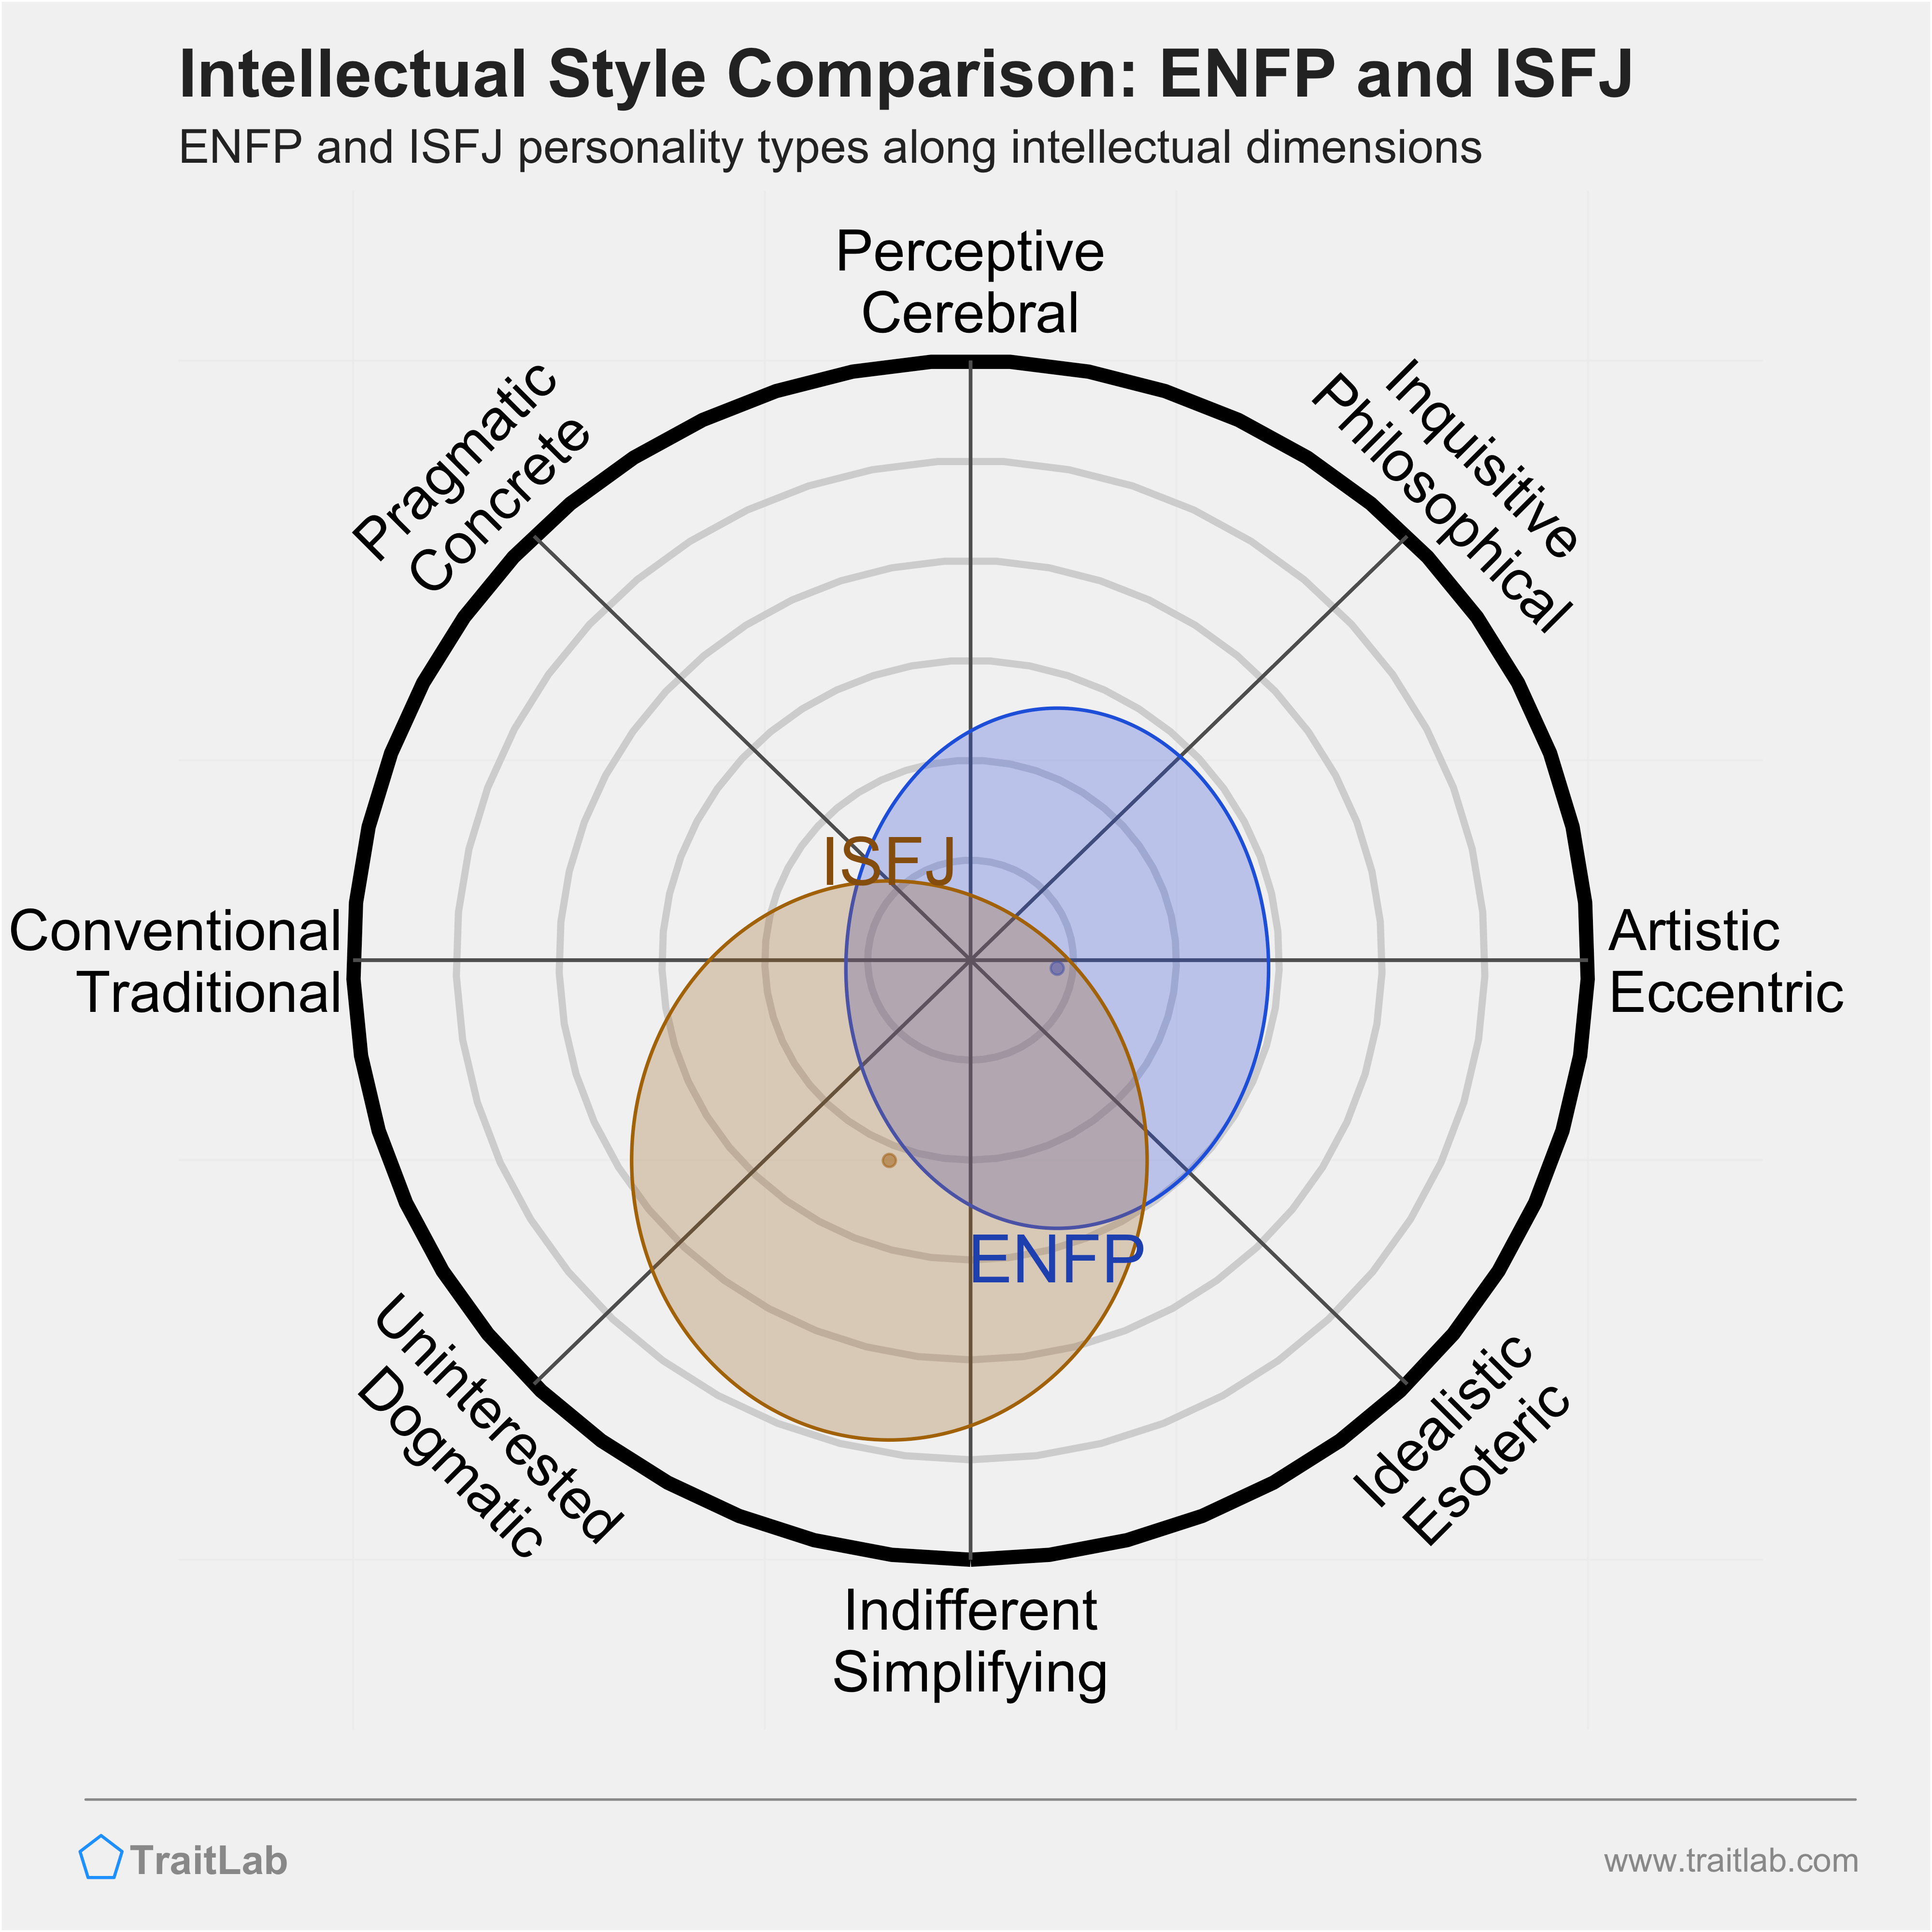 ENFP and ISFJ comparison across intellectual dimensions